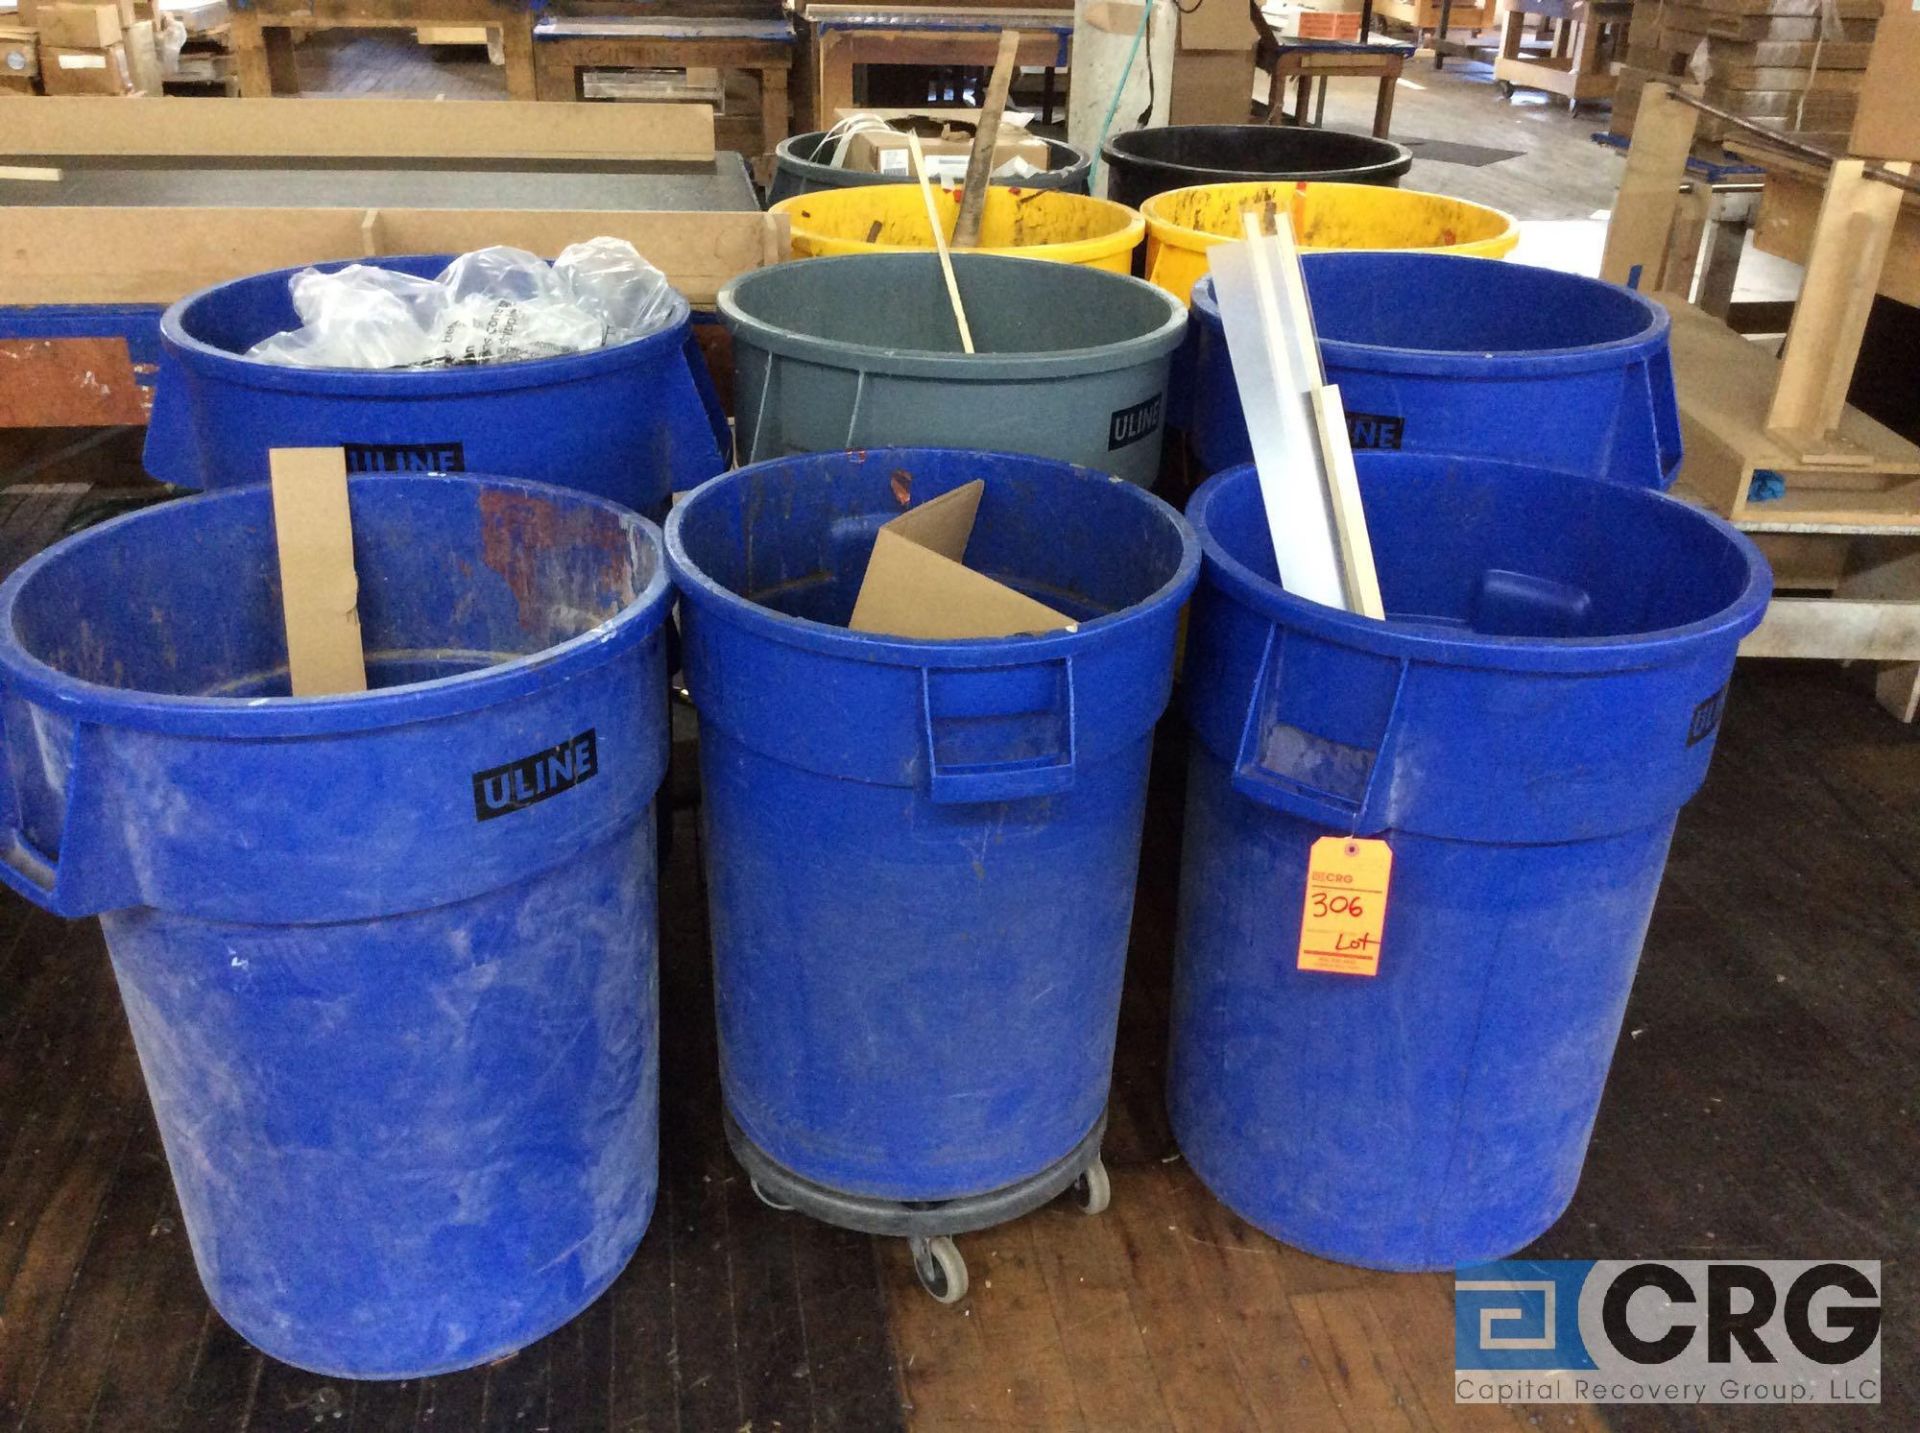 Lot of (4) 1 yd. rolling trash hoppers, (10) Uline 50 gallon trash cans on rolling bases